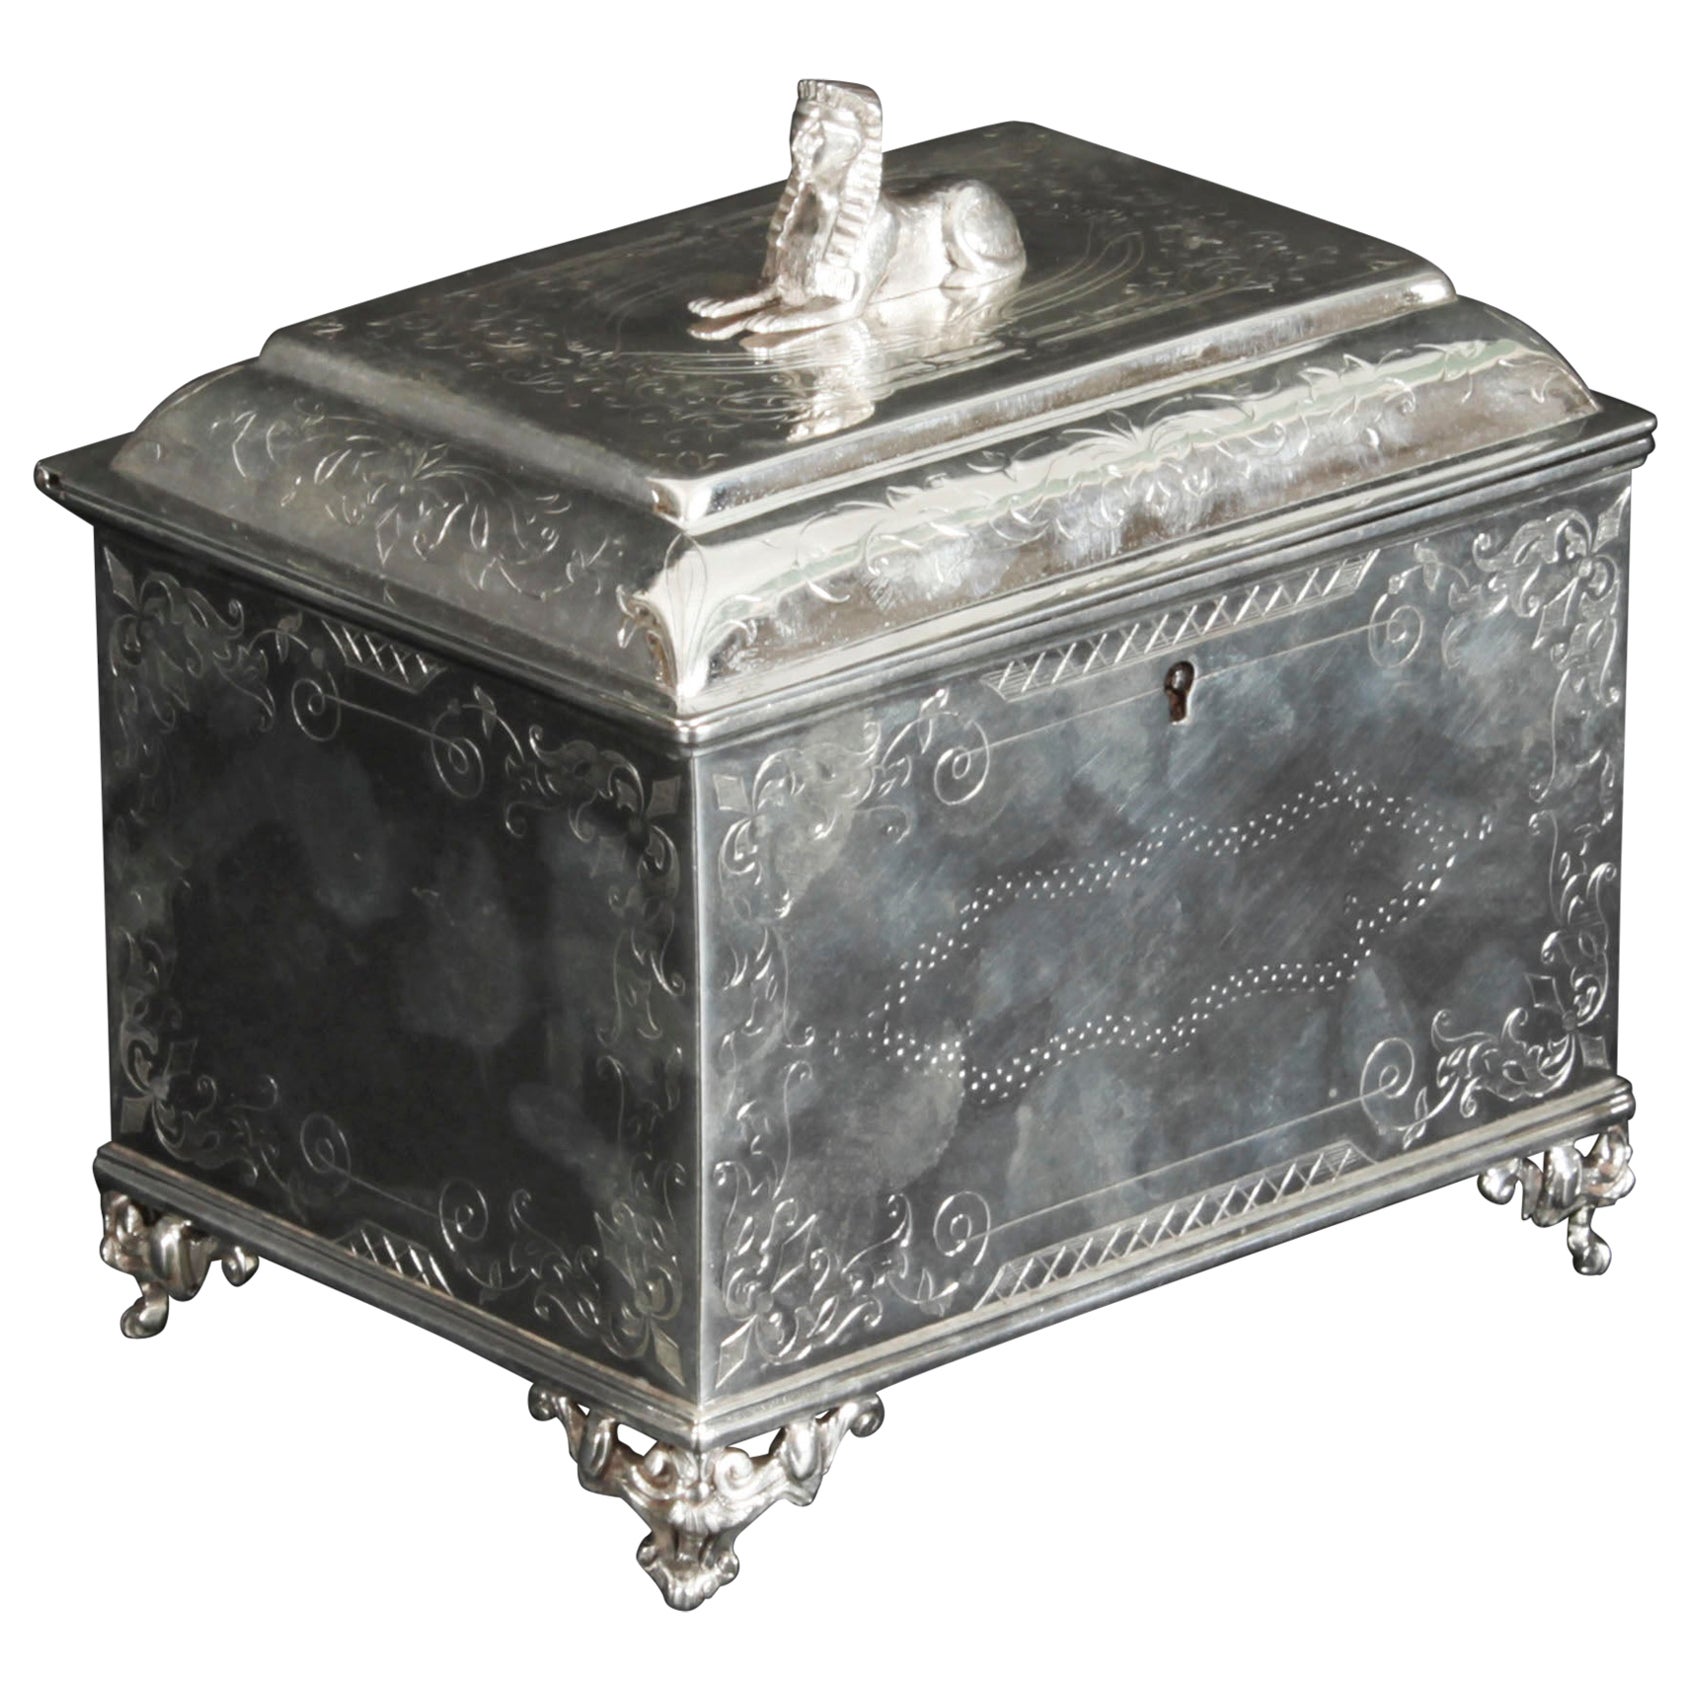 Antique Silver Plated Empire Revival Tea Caddy 19th Century For Sale